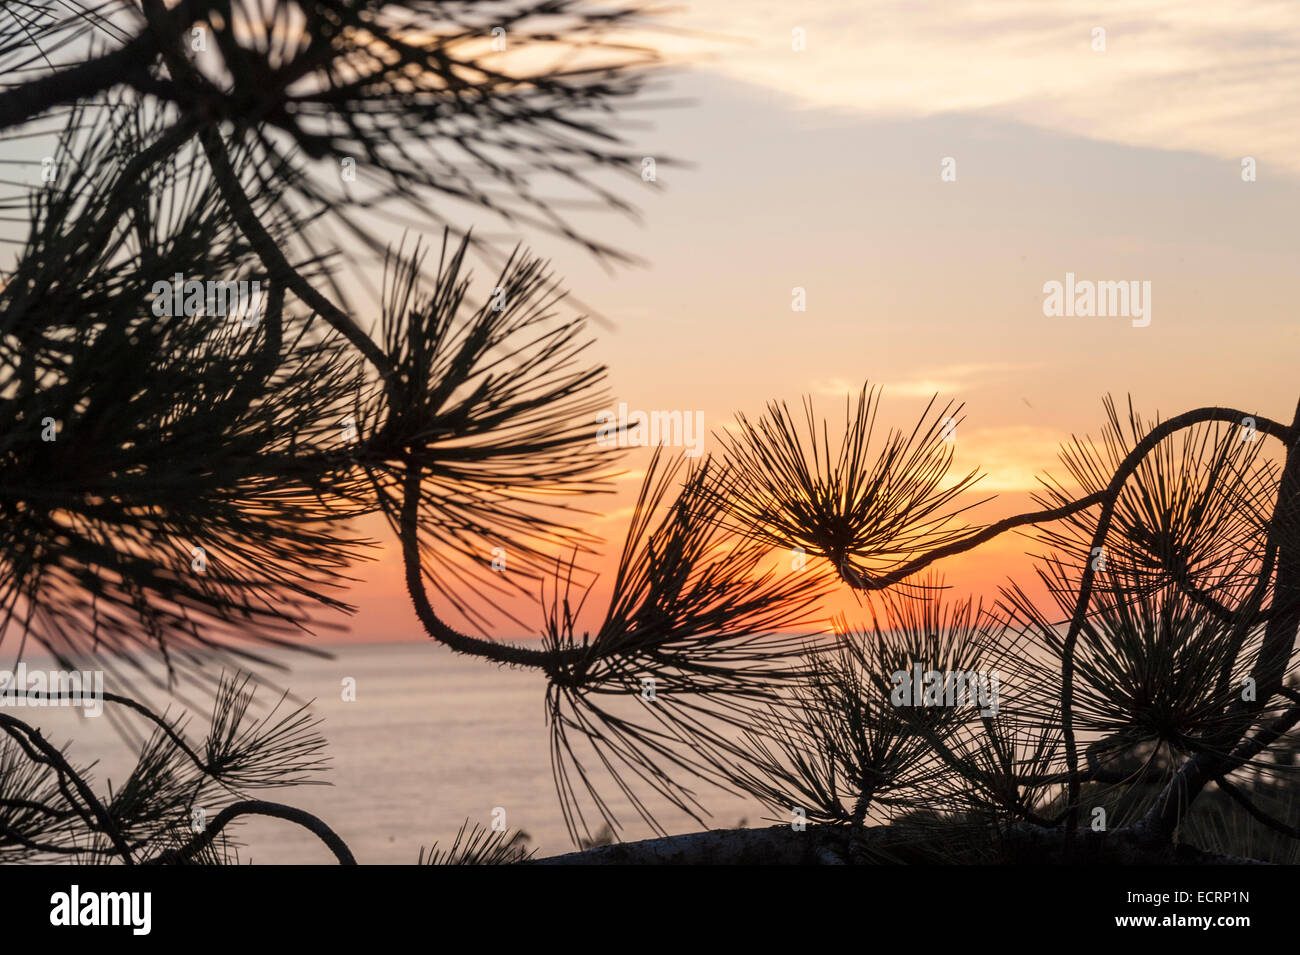 Silhouette of Torrey Pine branches against setting sun over Pacific Ocean at Torrey Pines State Park, California Stock Photo